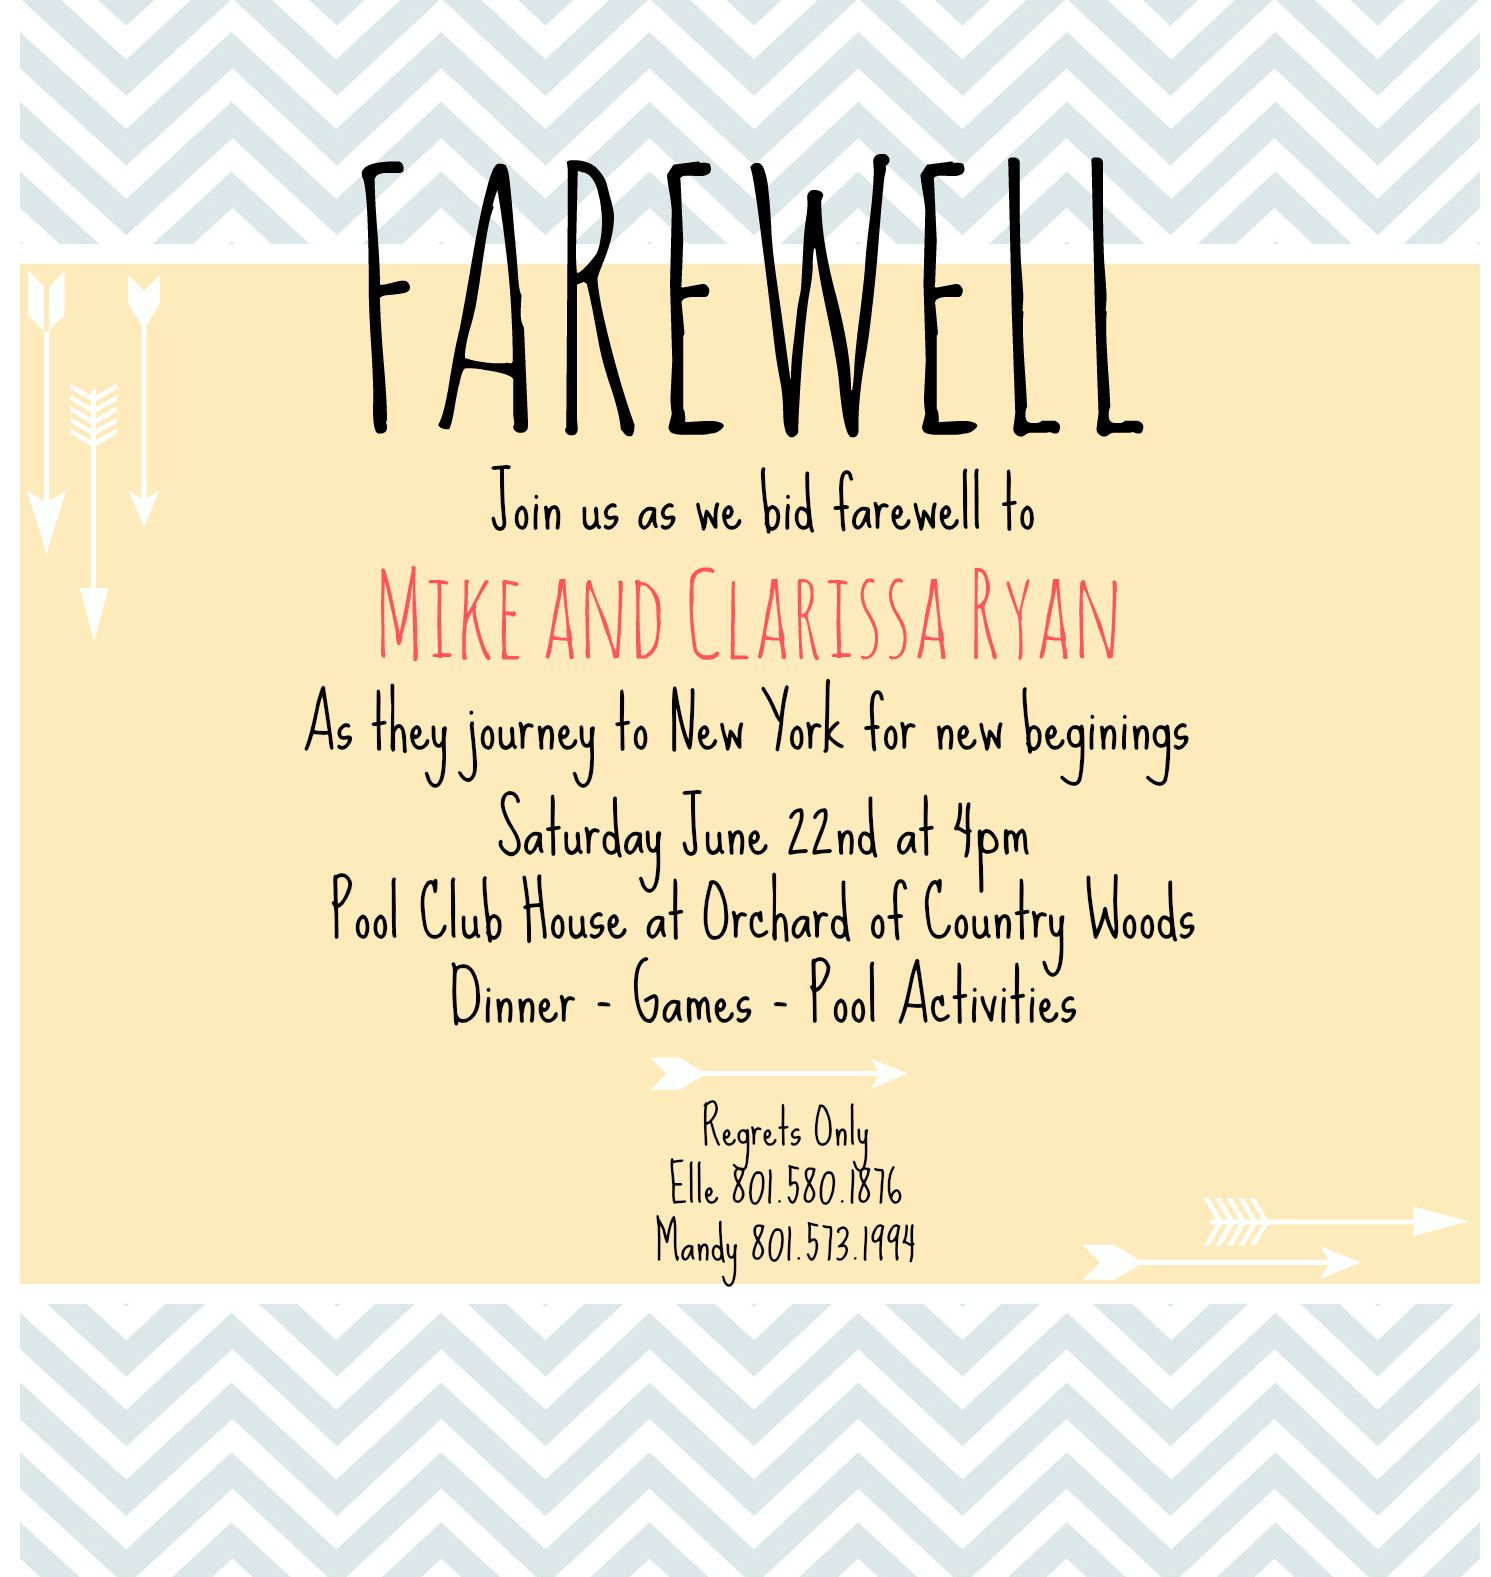 Farewell Invite | Going Away Party Invitations, Farewell Pertaining To Farewell Invitation Card Template